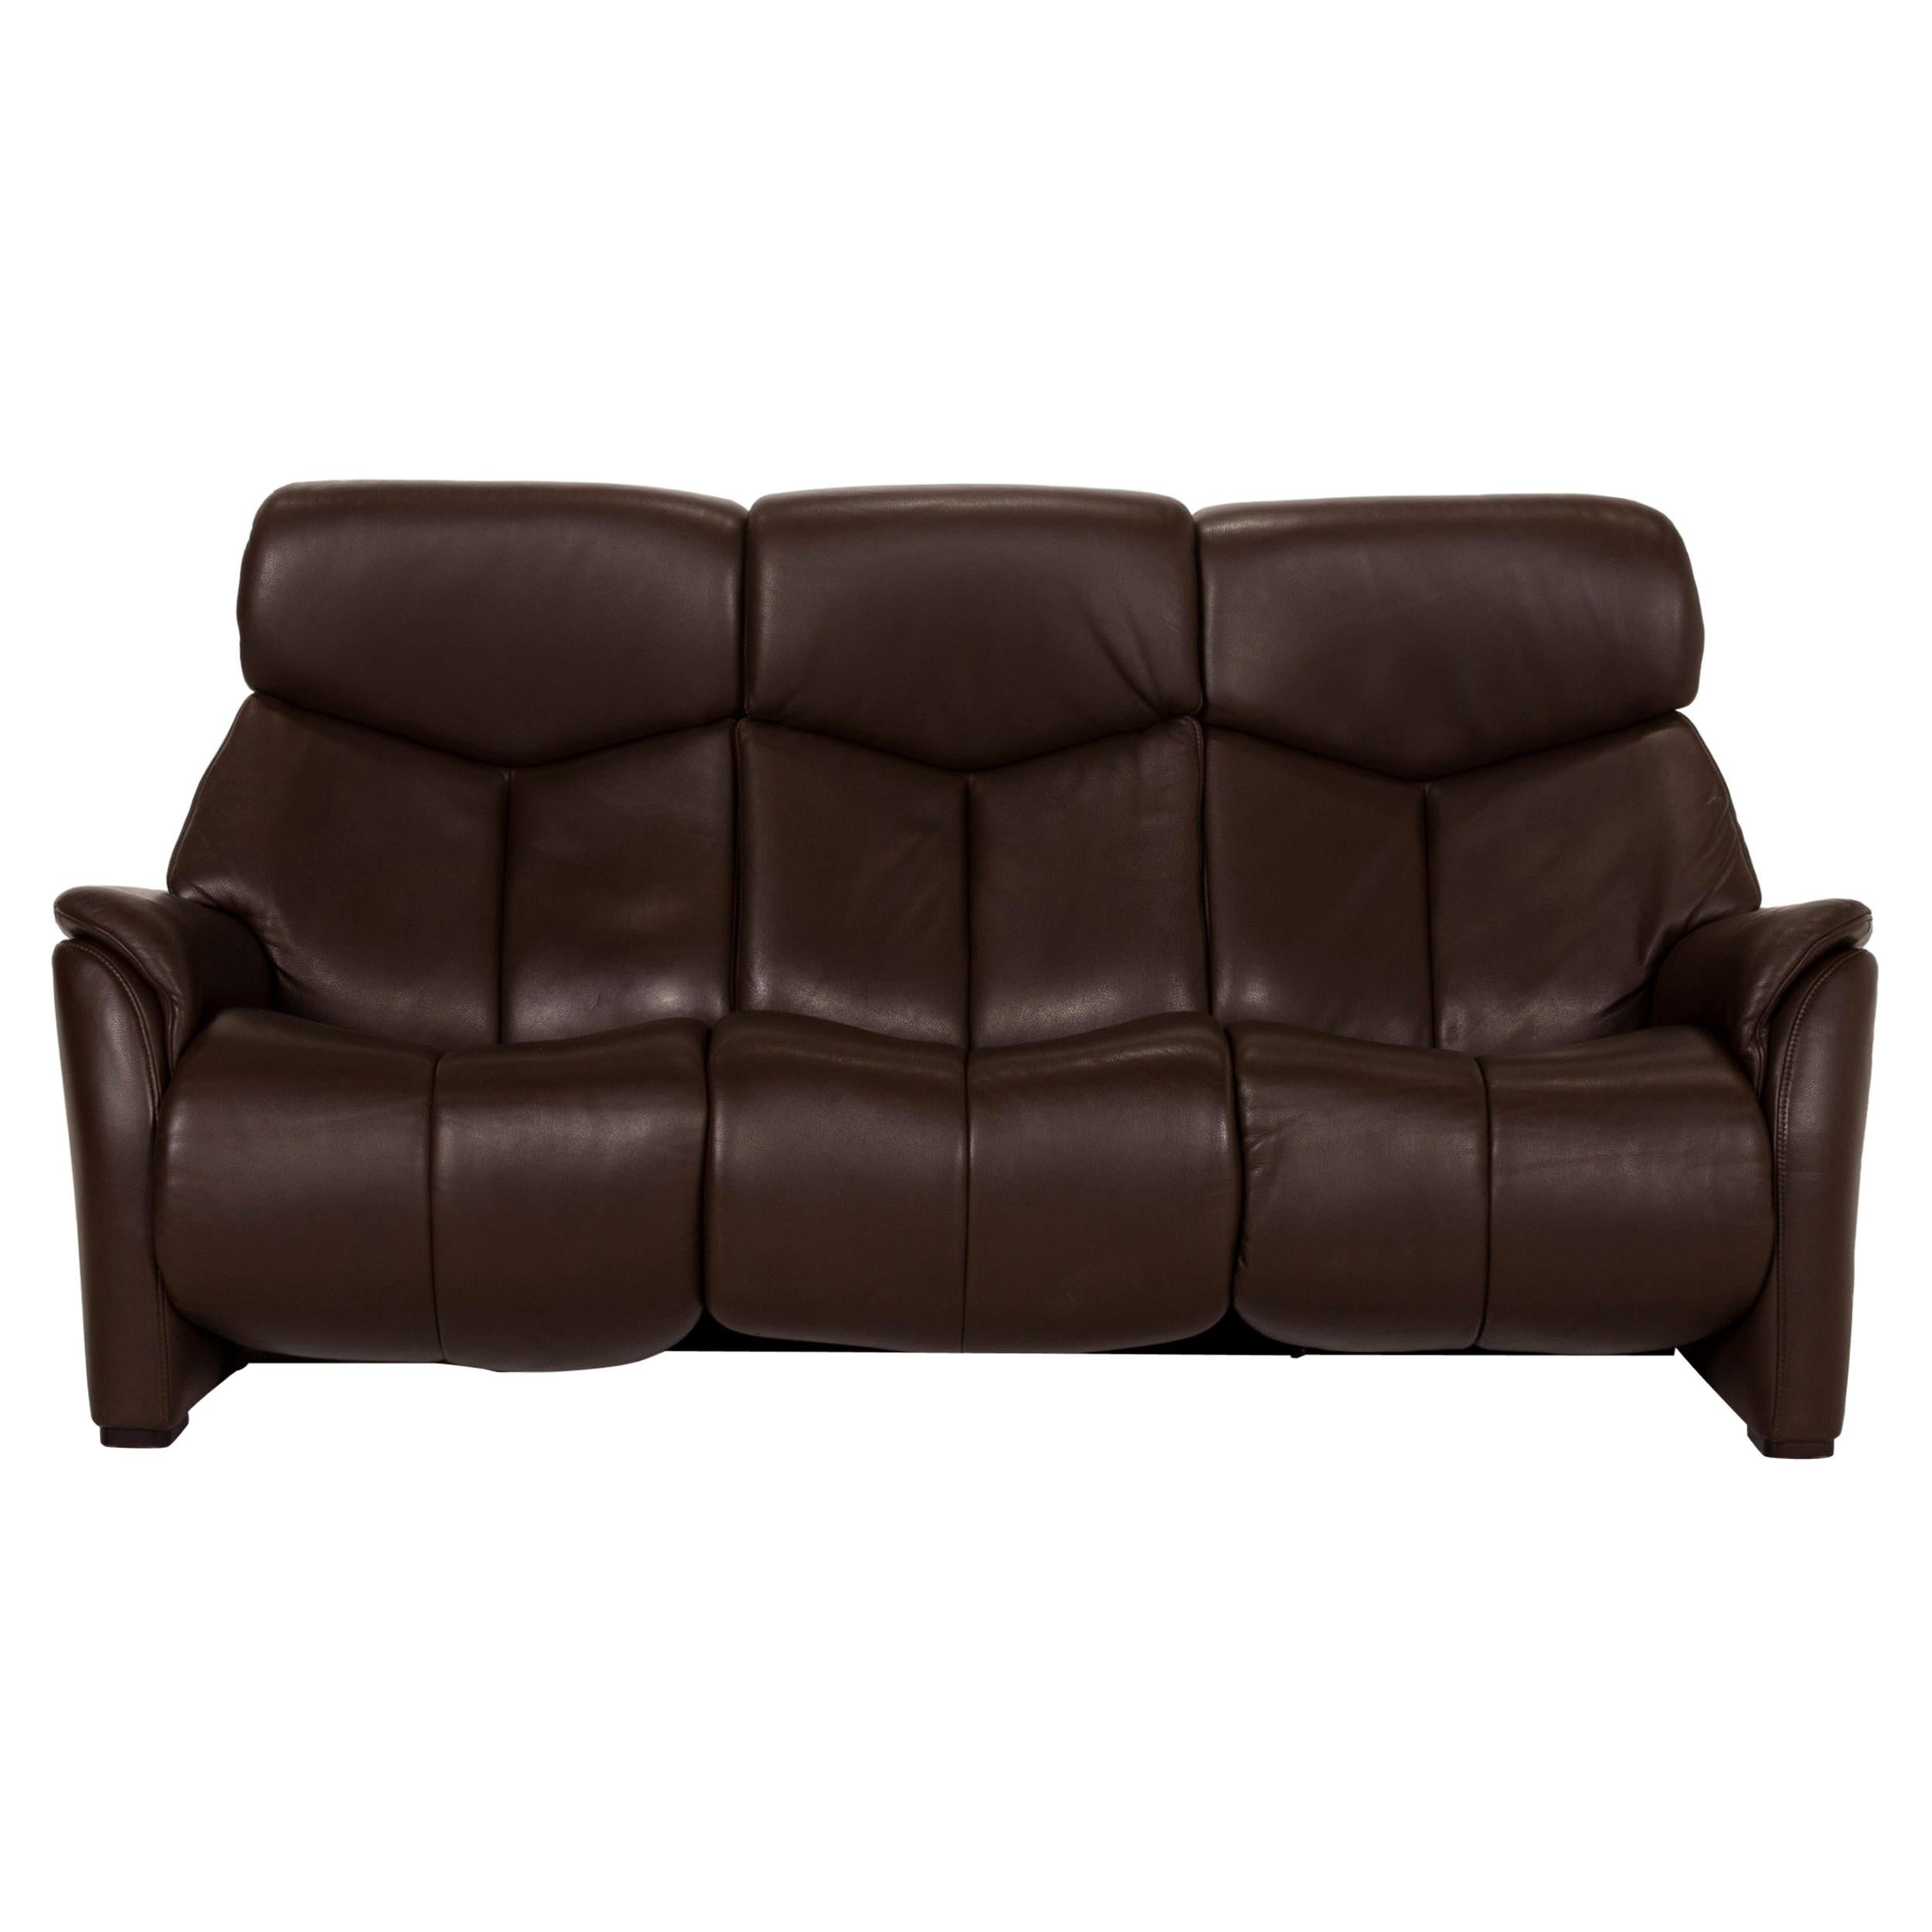 Hukla Nevada Leather Sofa Brown Three-Seater Electric Relaxation Function Dark